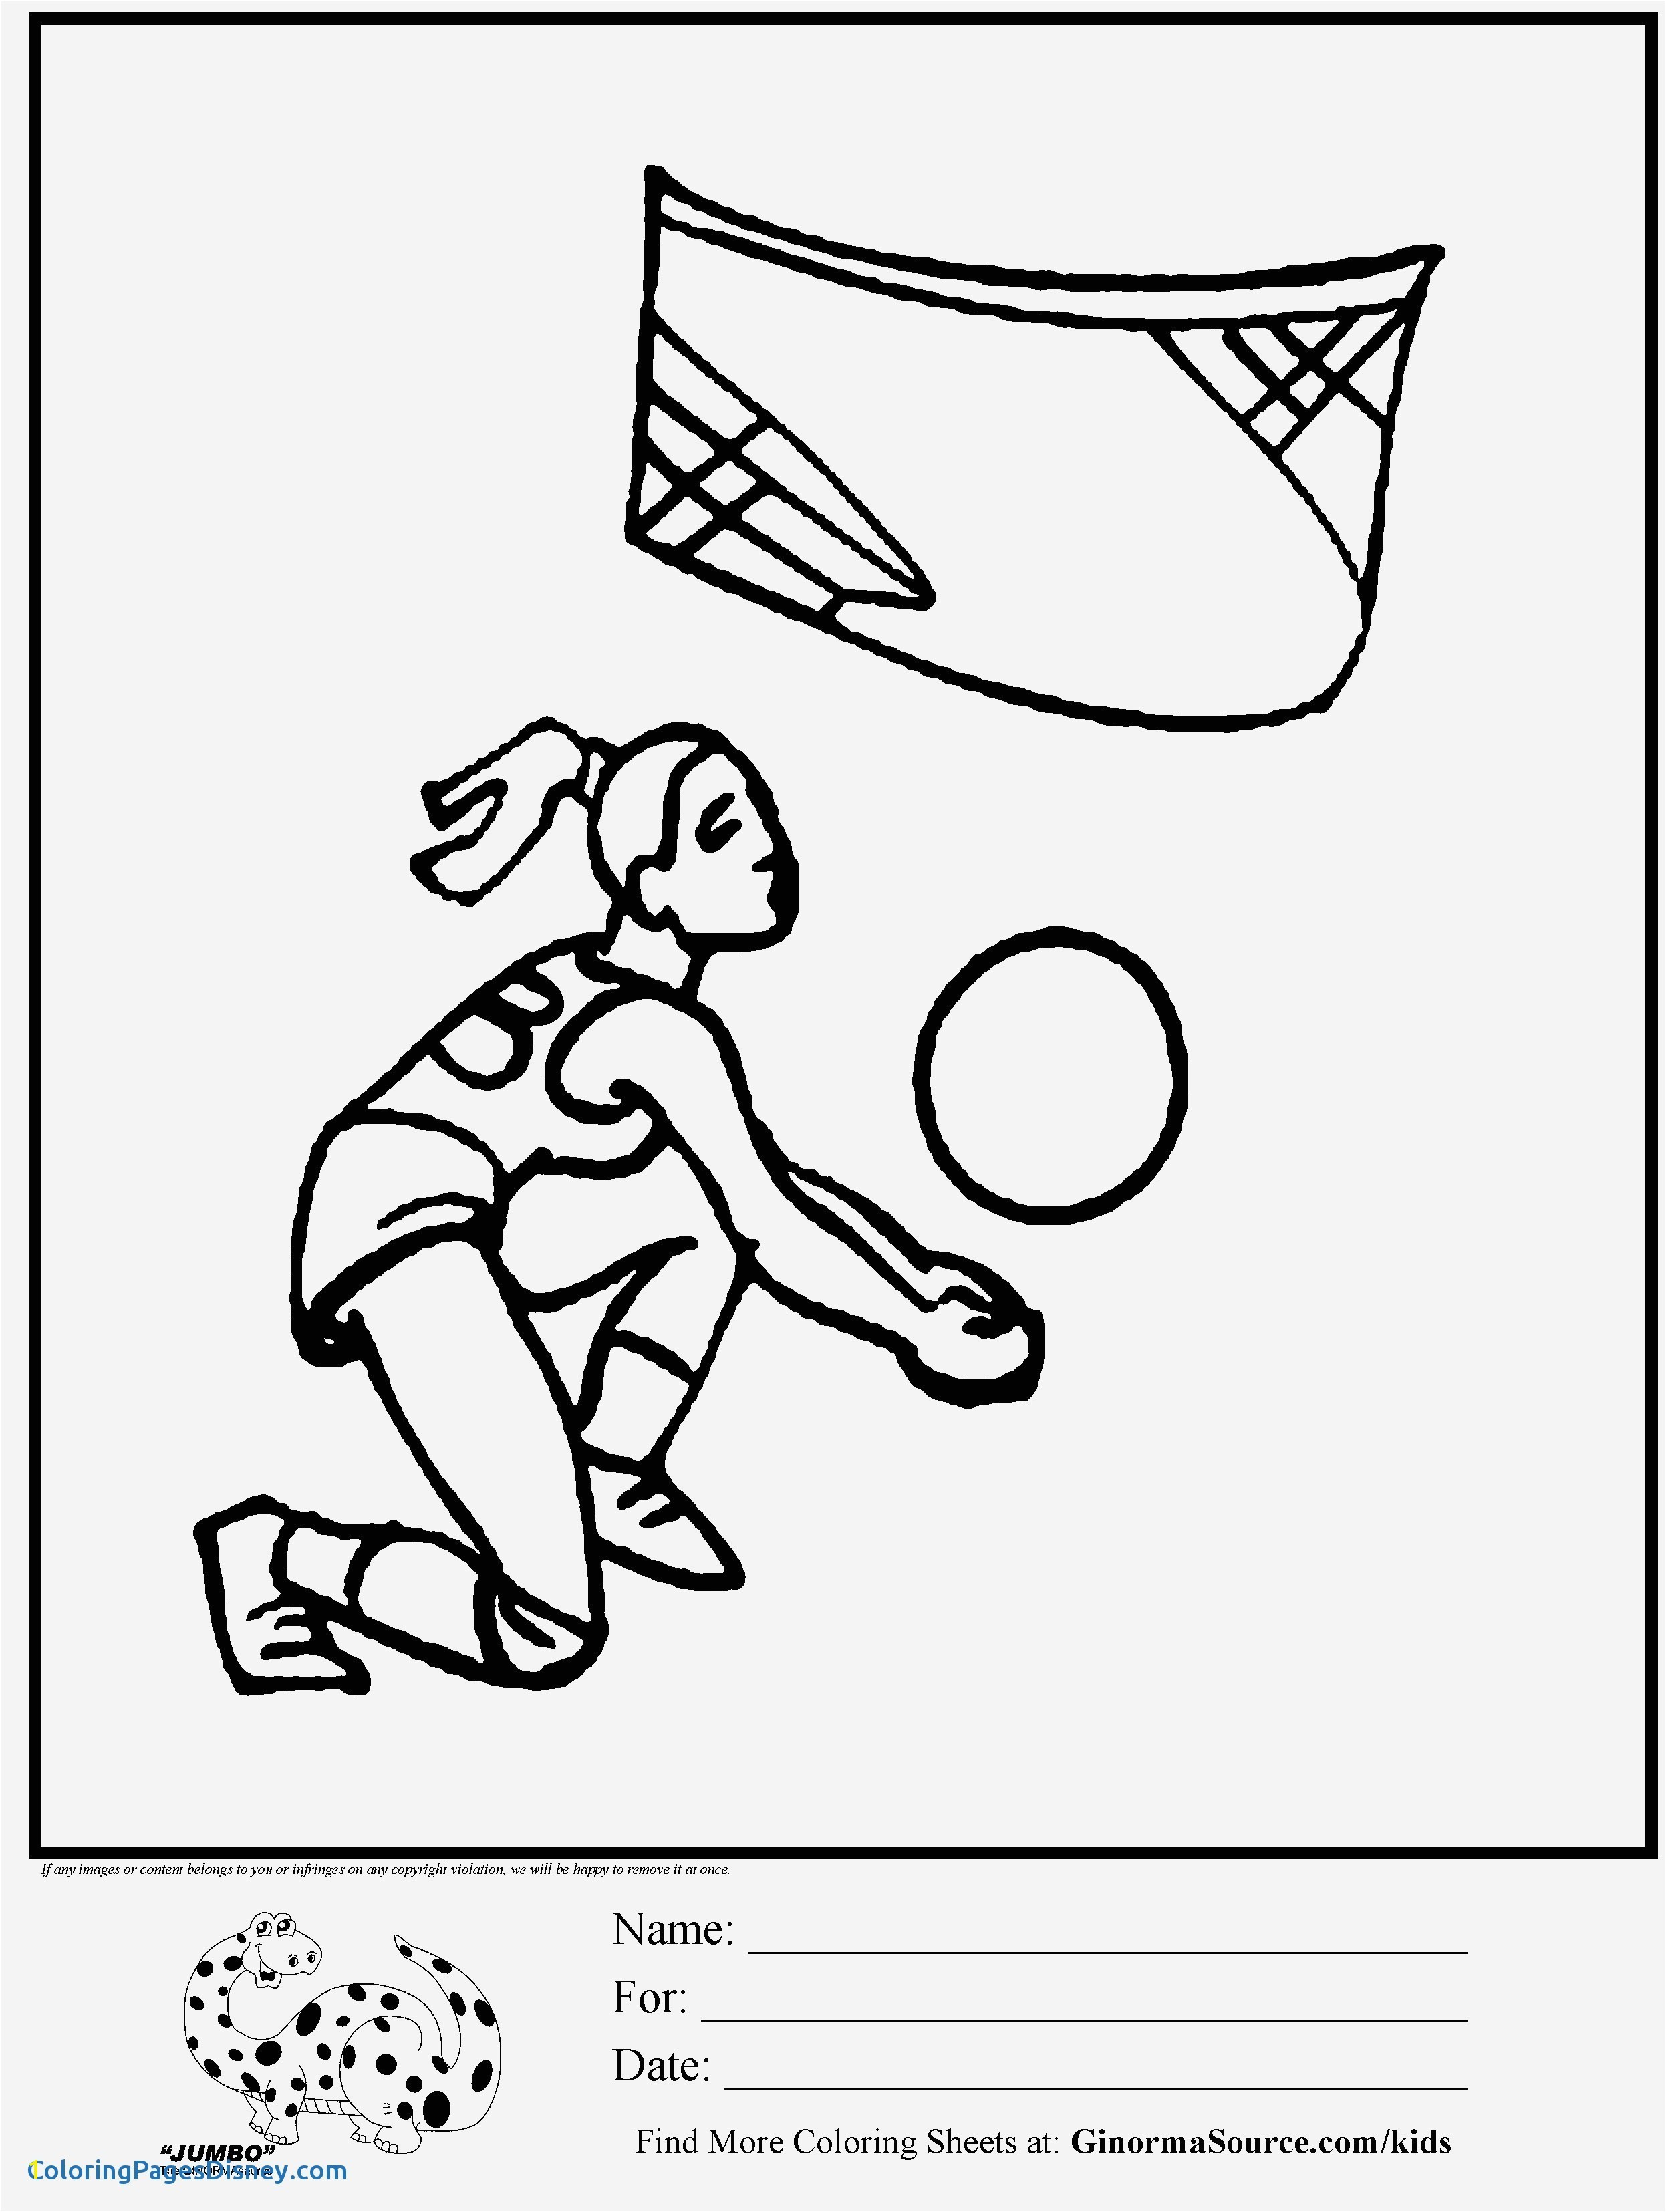 Chicago Cubs Coloring Pages Elegant Mlb Coloring Pages Image Printable Coloring Pages